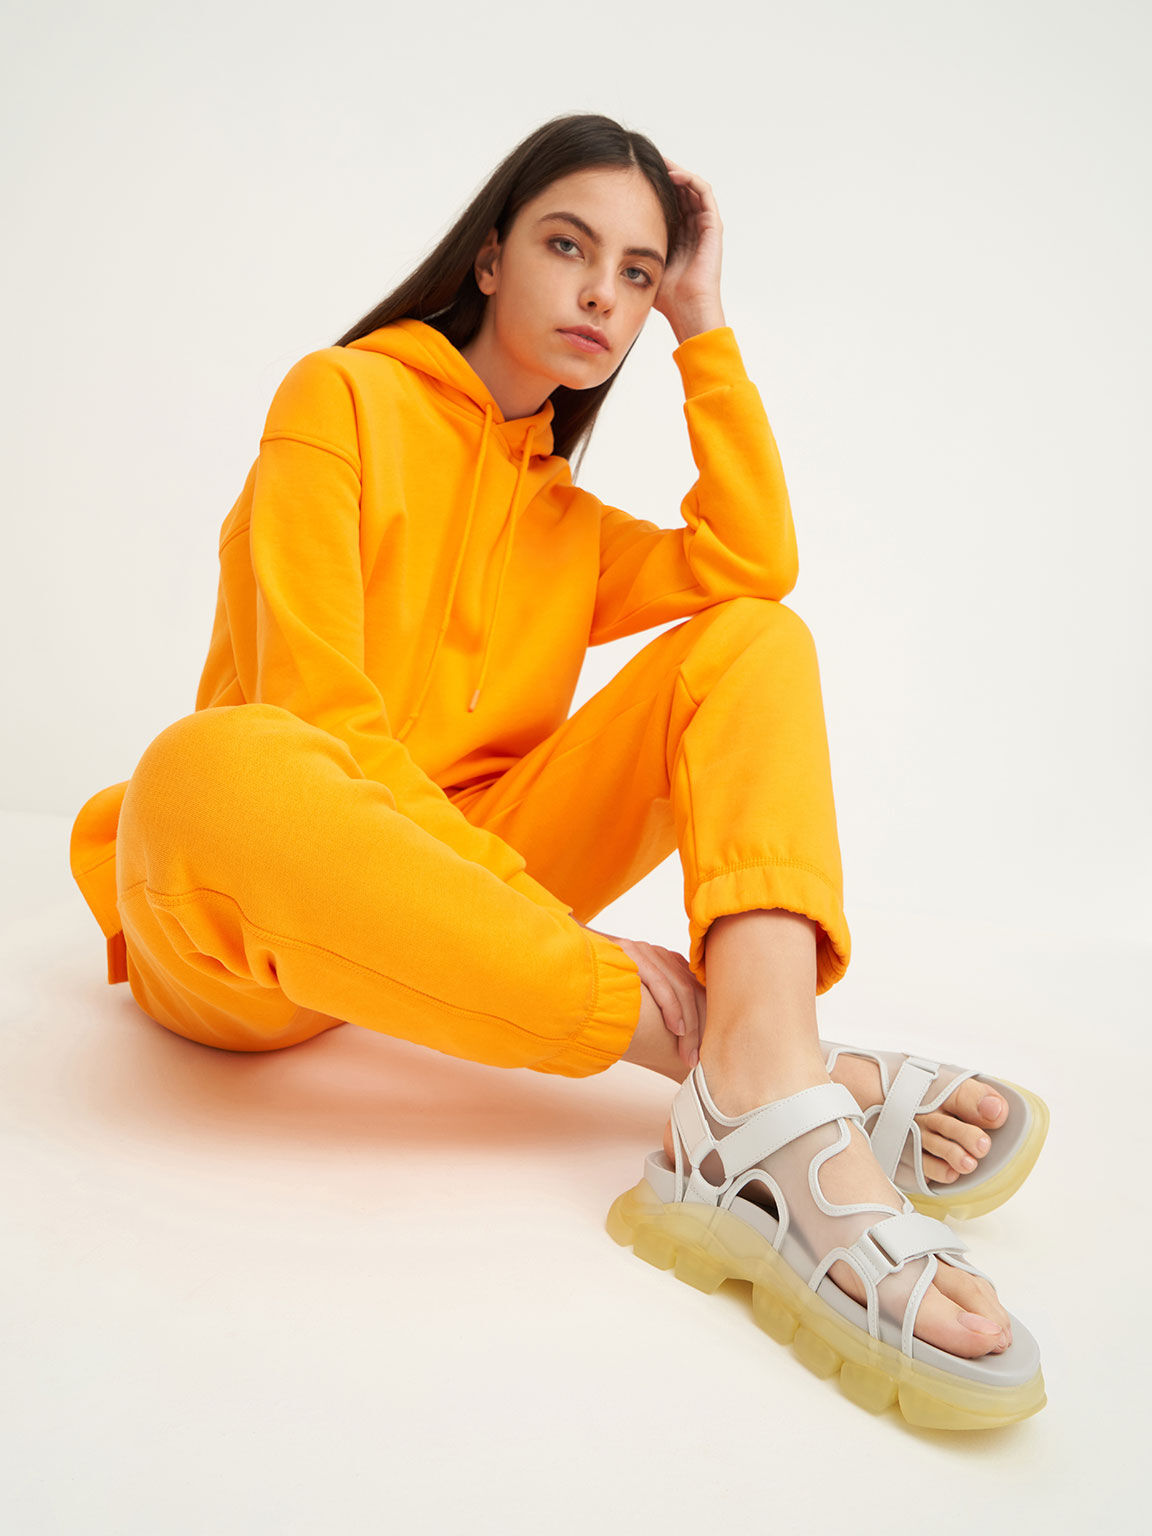 Coloured Translucent-Sole Chunky Sport Sandals, Yellow, hi-res